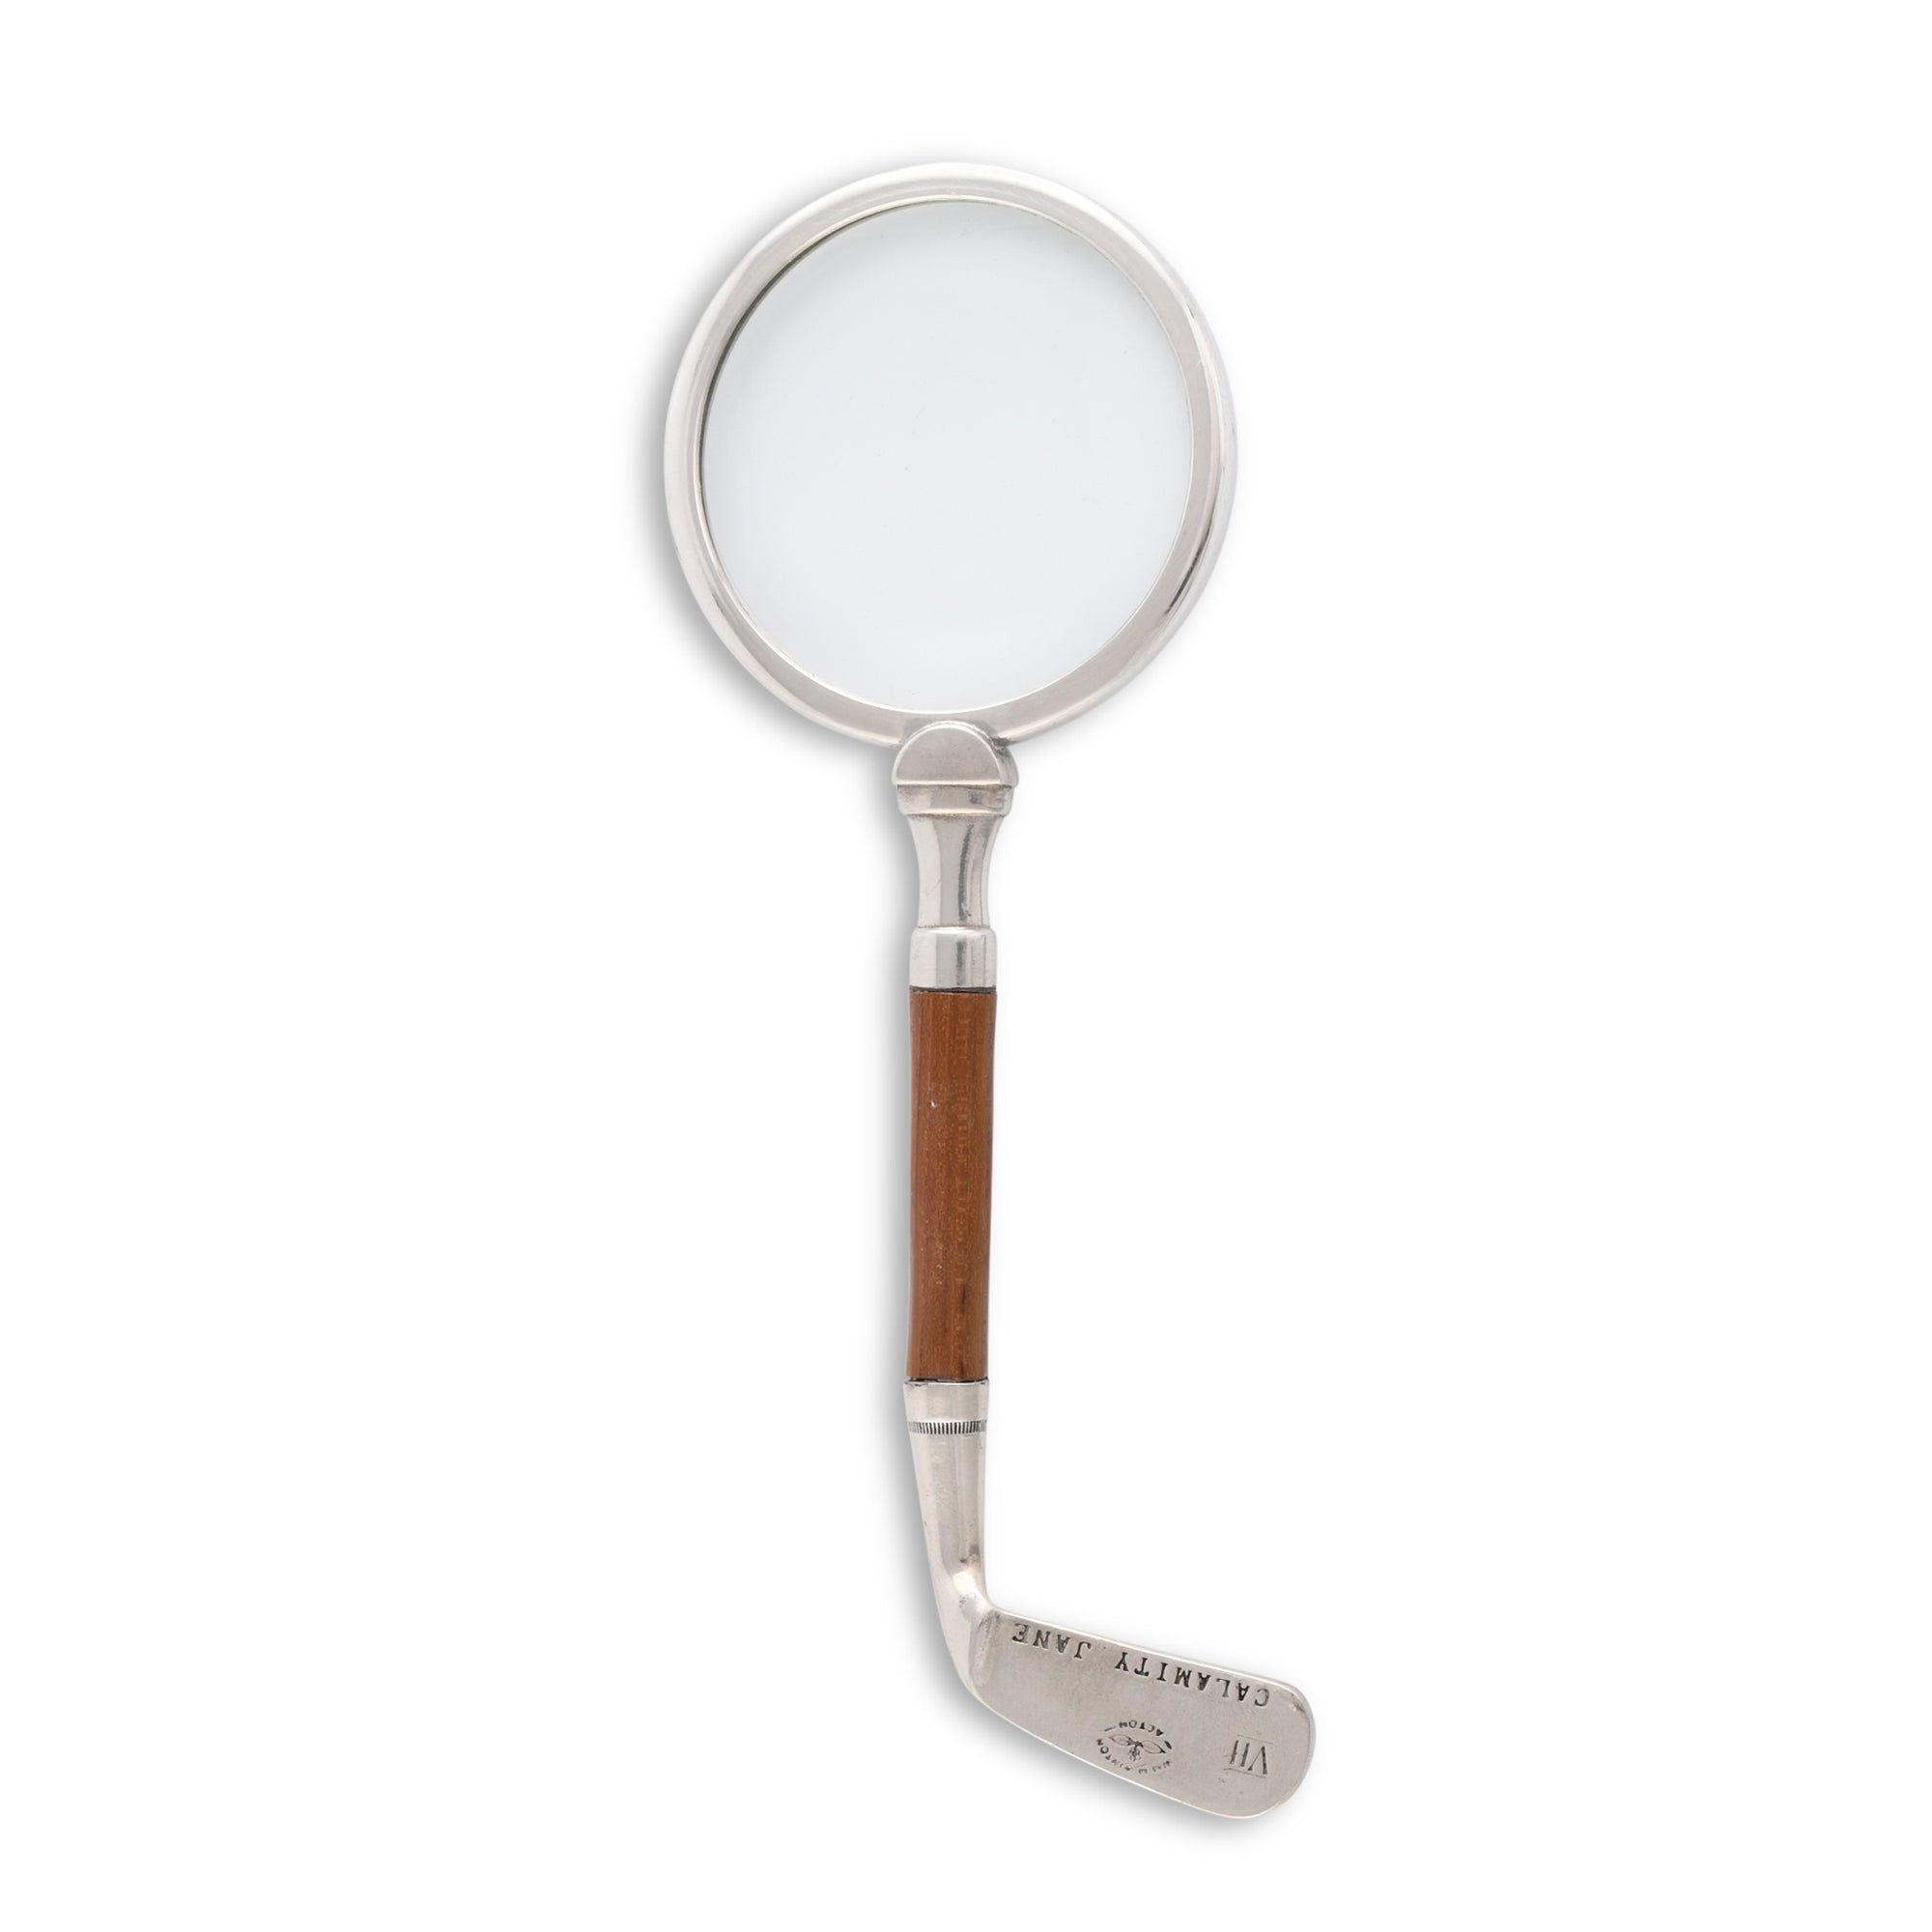 Vagabond House Golf Club Pewter Magnifier Product Image